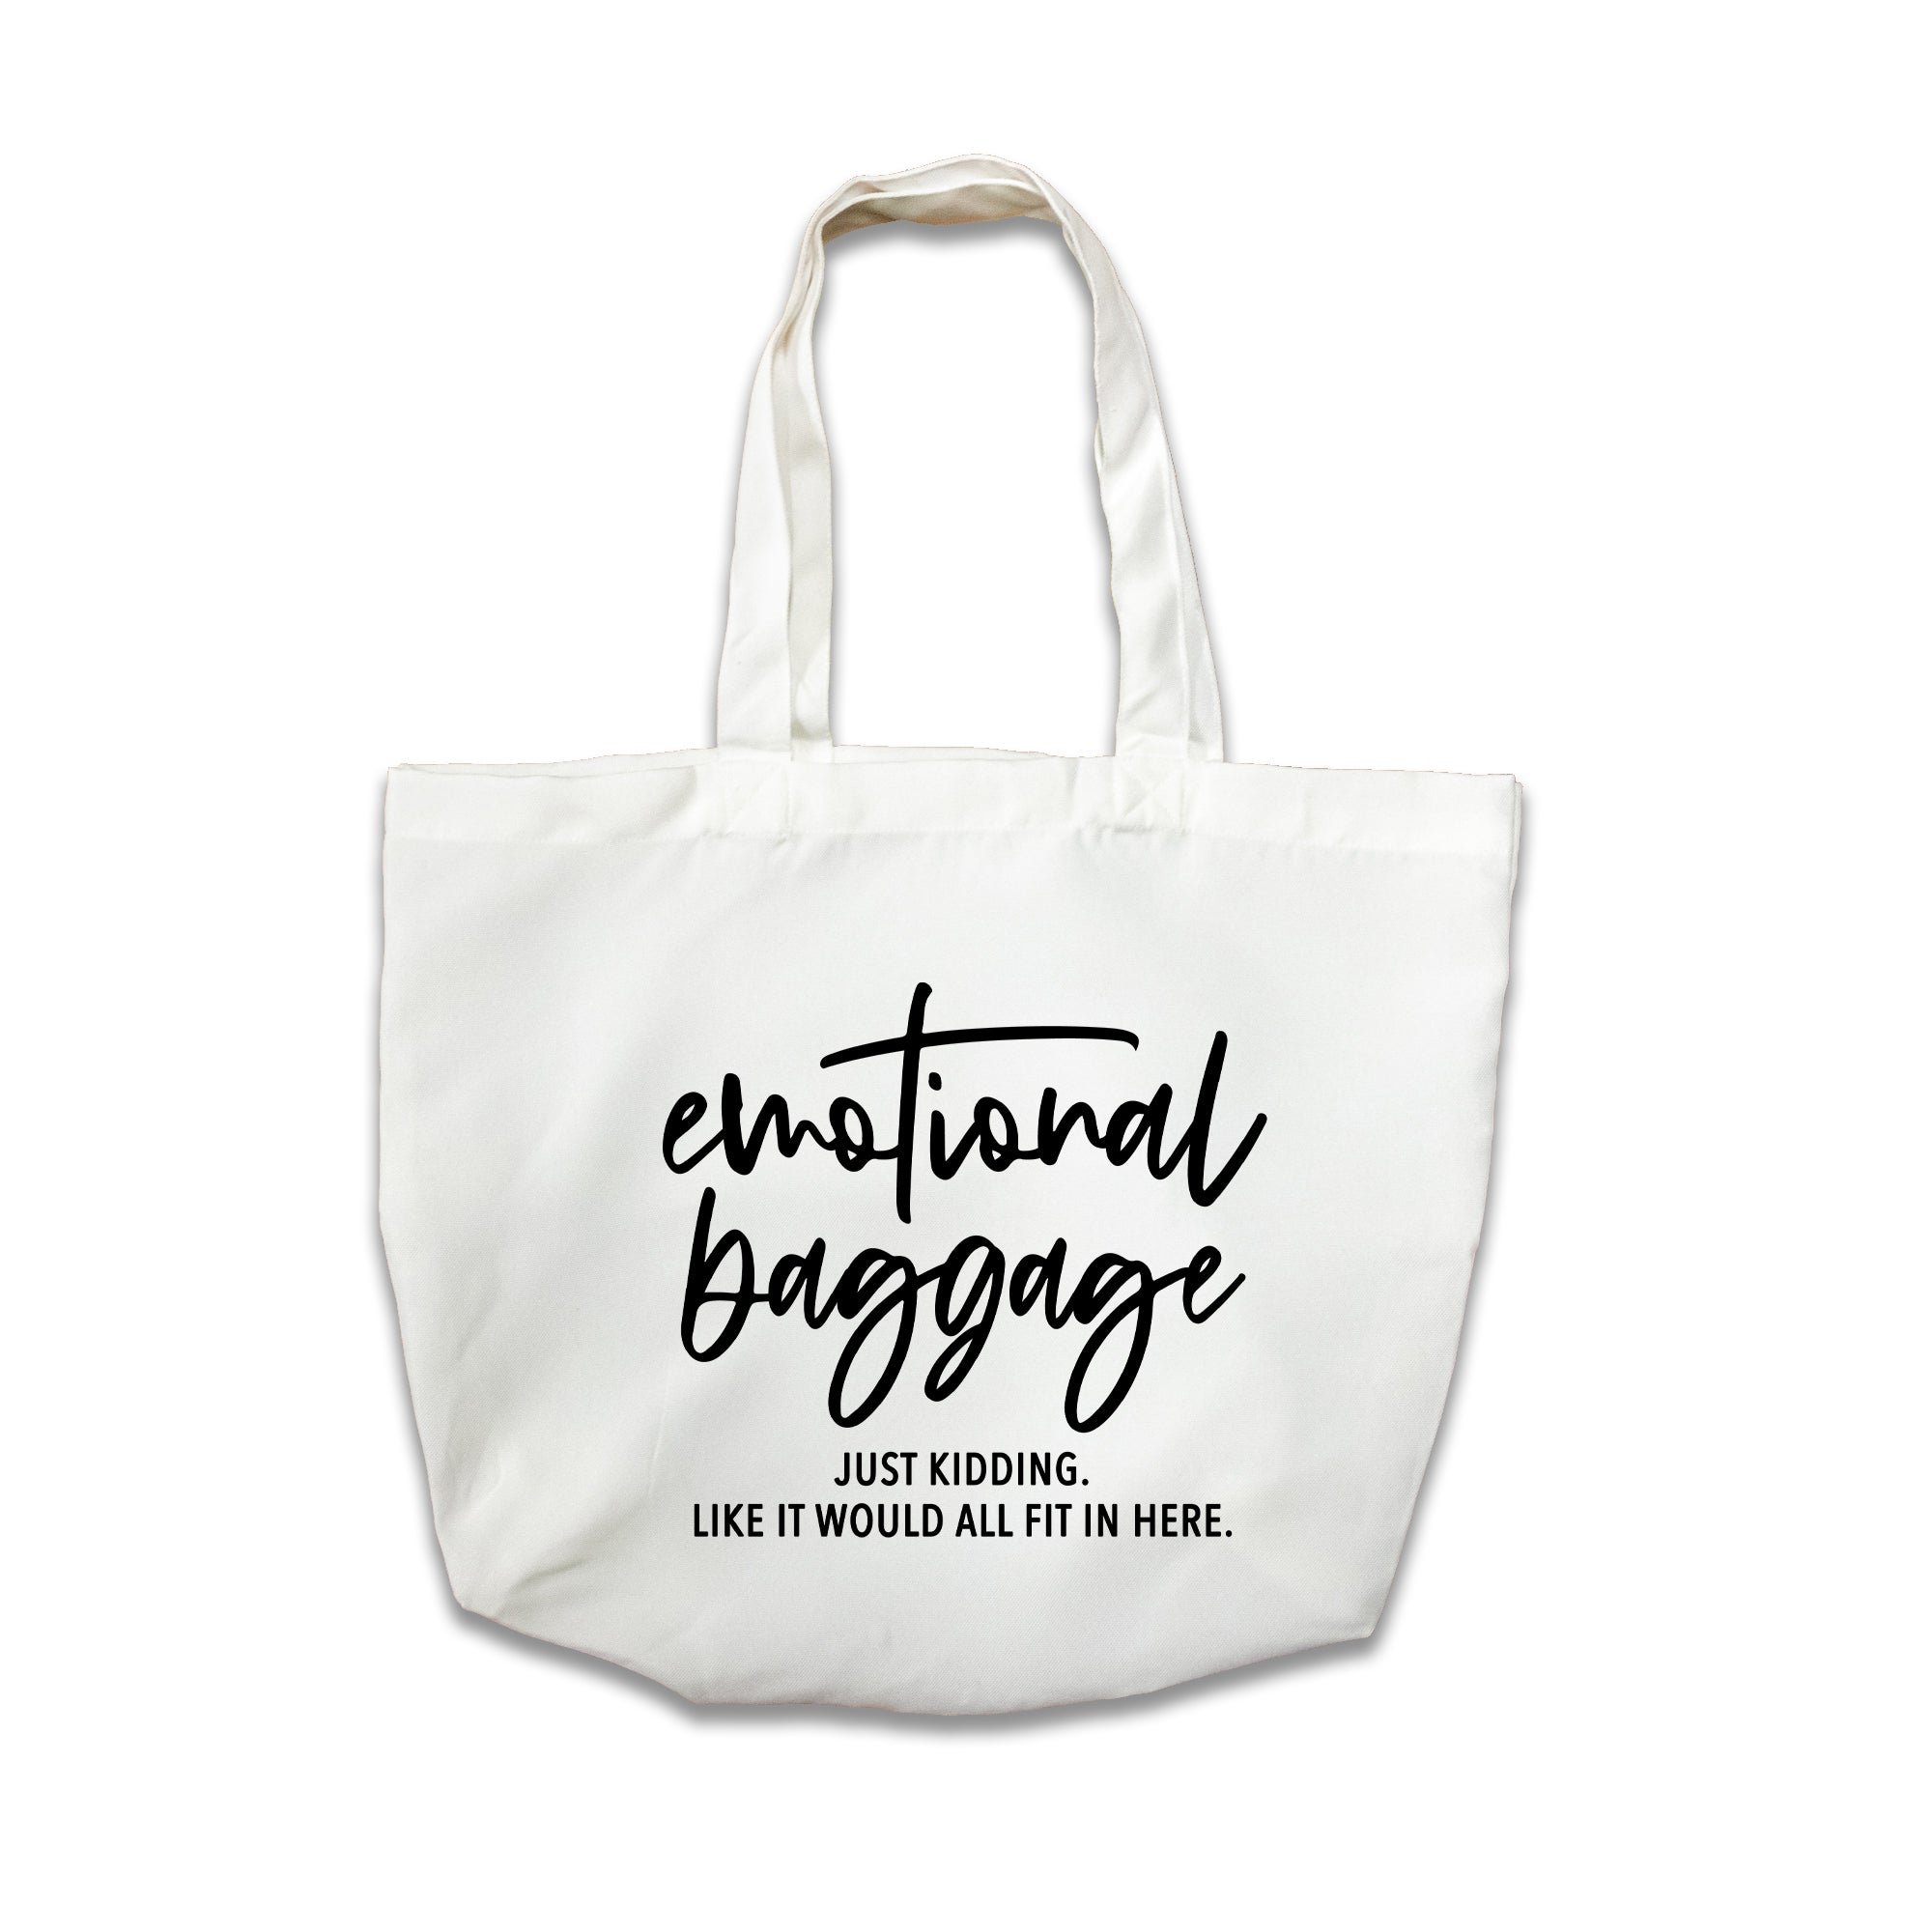 100 Polyester Tote Bags rededuct